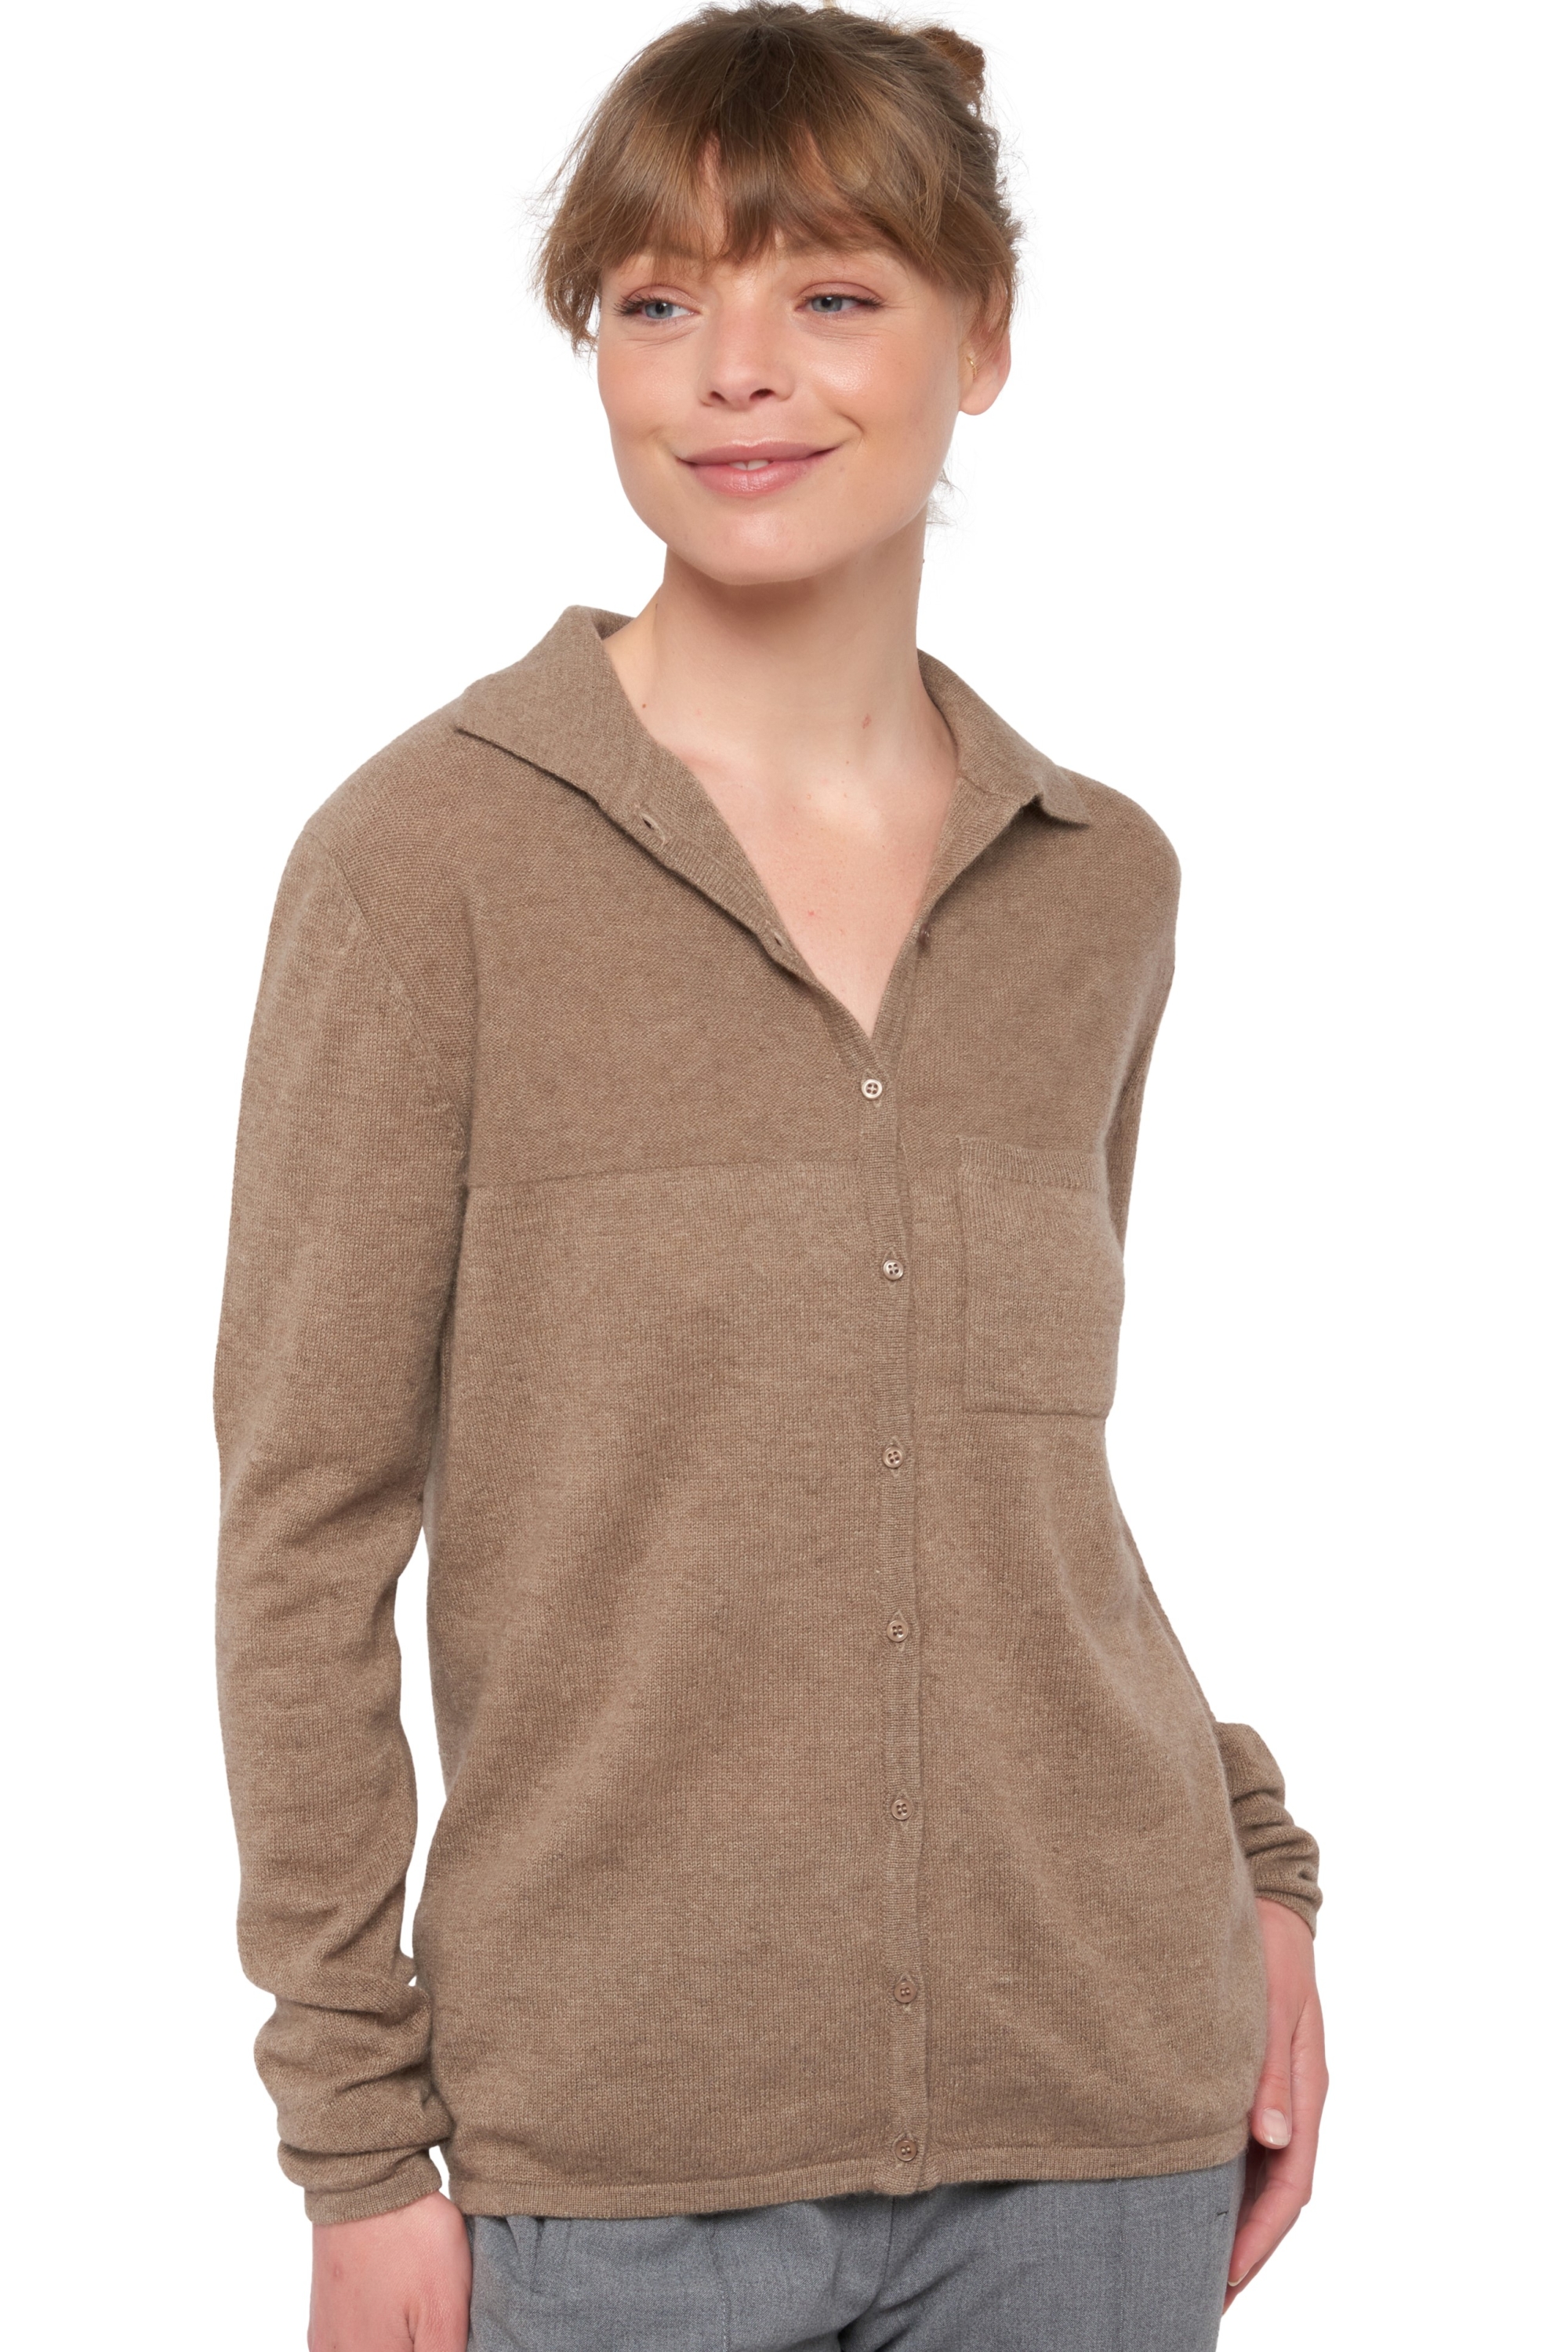 Cachemire pull femme soldes umea natural brown m